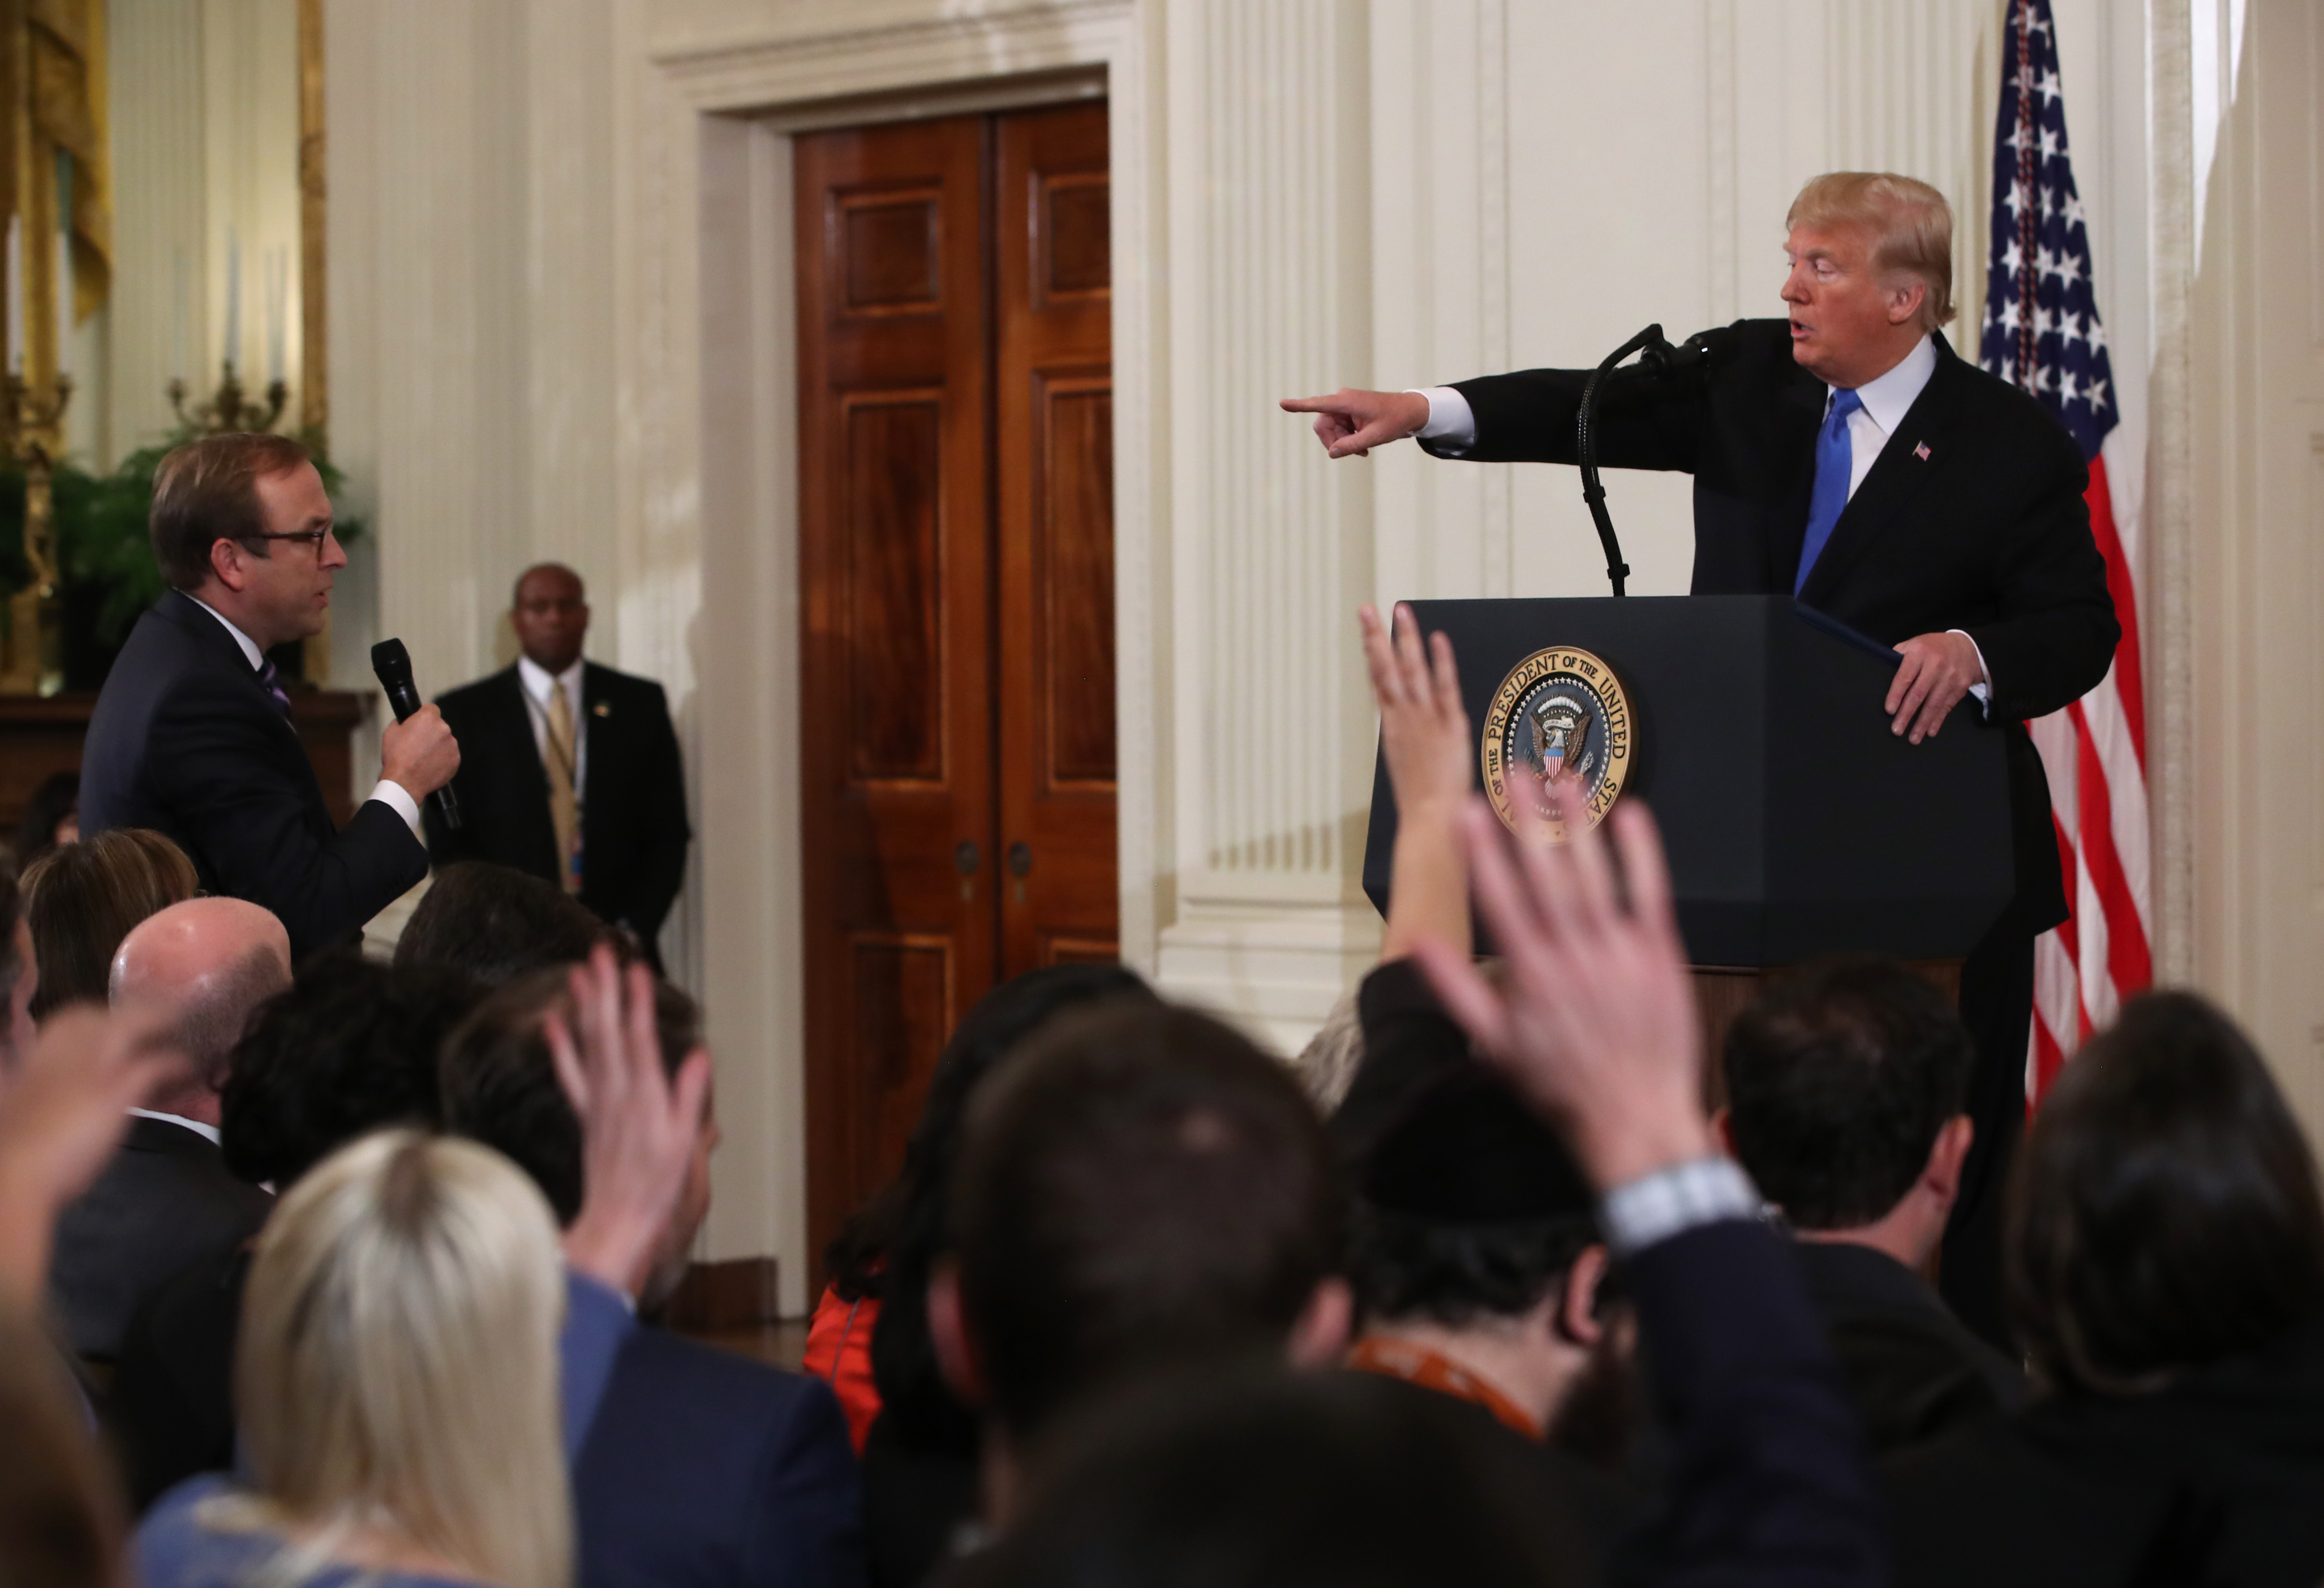 WASHINGTON, DC - NOVEMBER 07: U.S. President Donald Trump answers questions after giving remarks a day after the midterm elections on November 7, 2018 in the East Room of the White House in Washington, DC. Republicans kept the Senate majority but lost control of the House to the Democrats. (Photo by Mark Wilson/Getty Images)